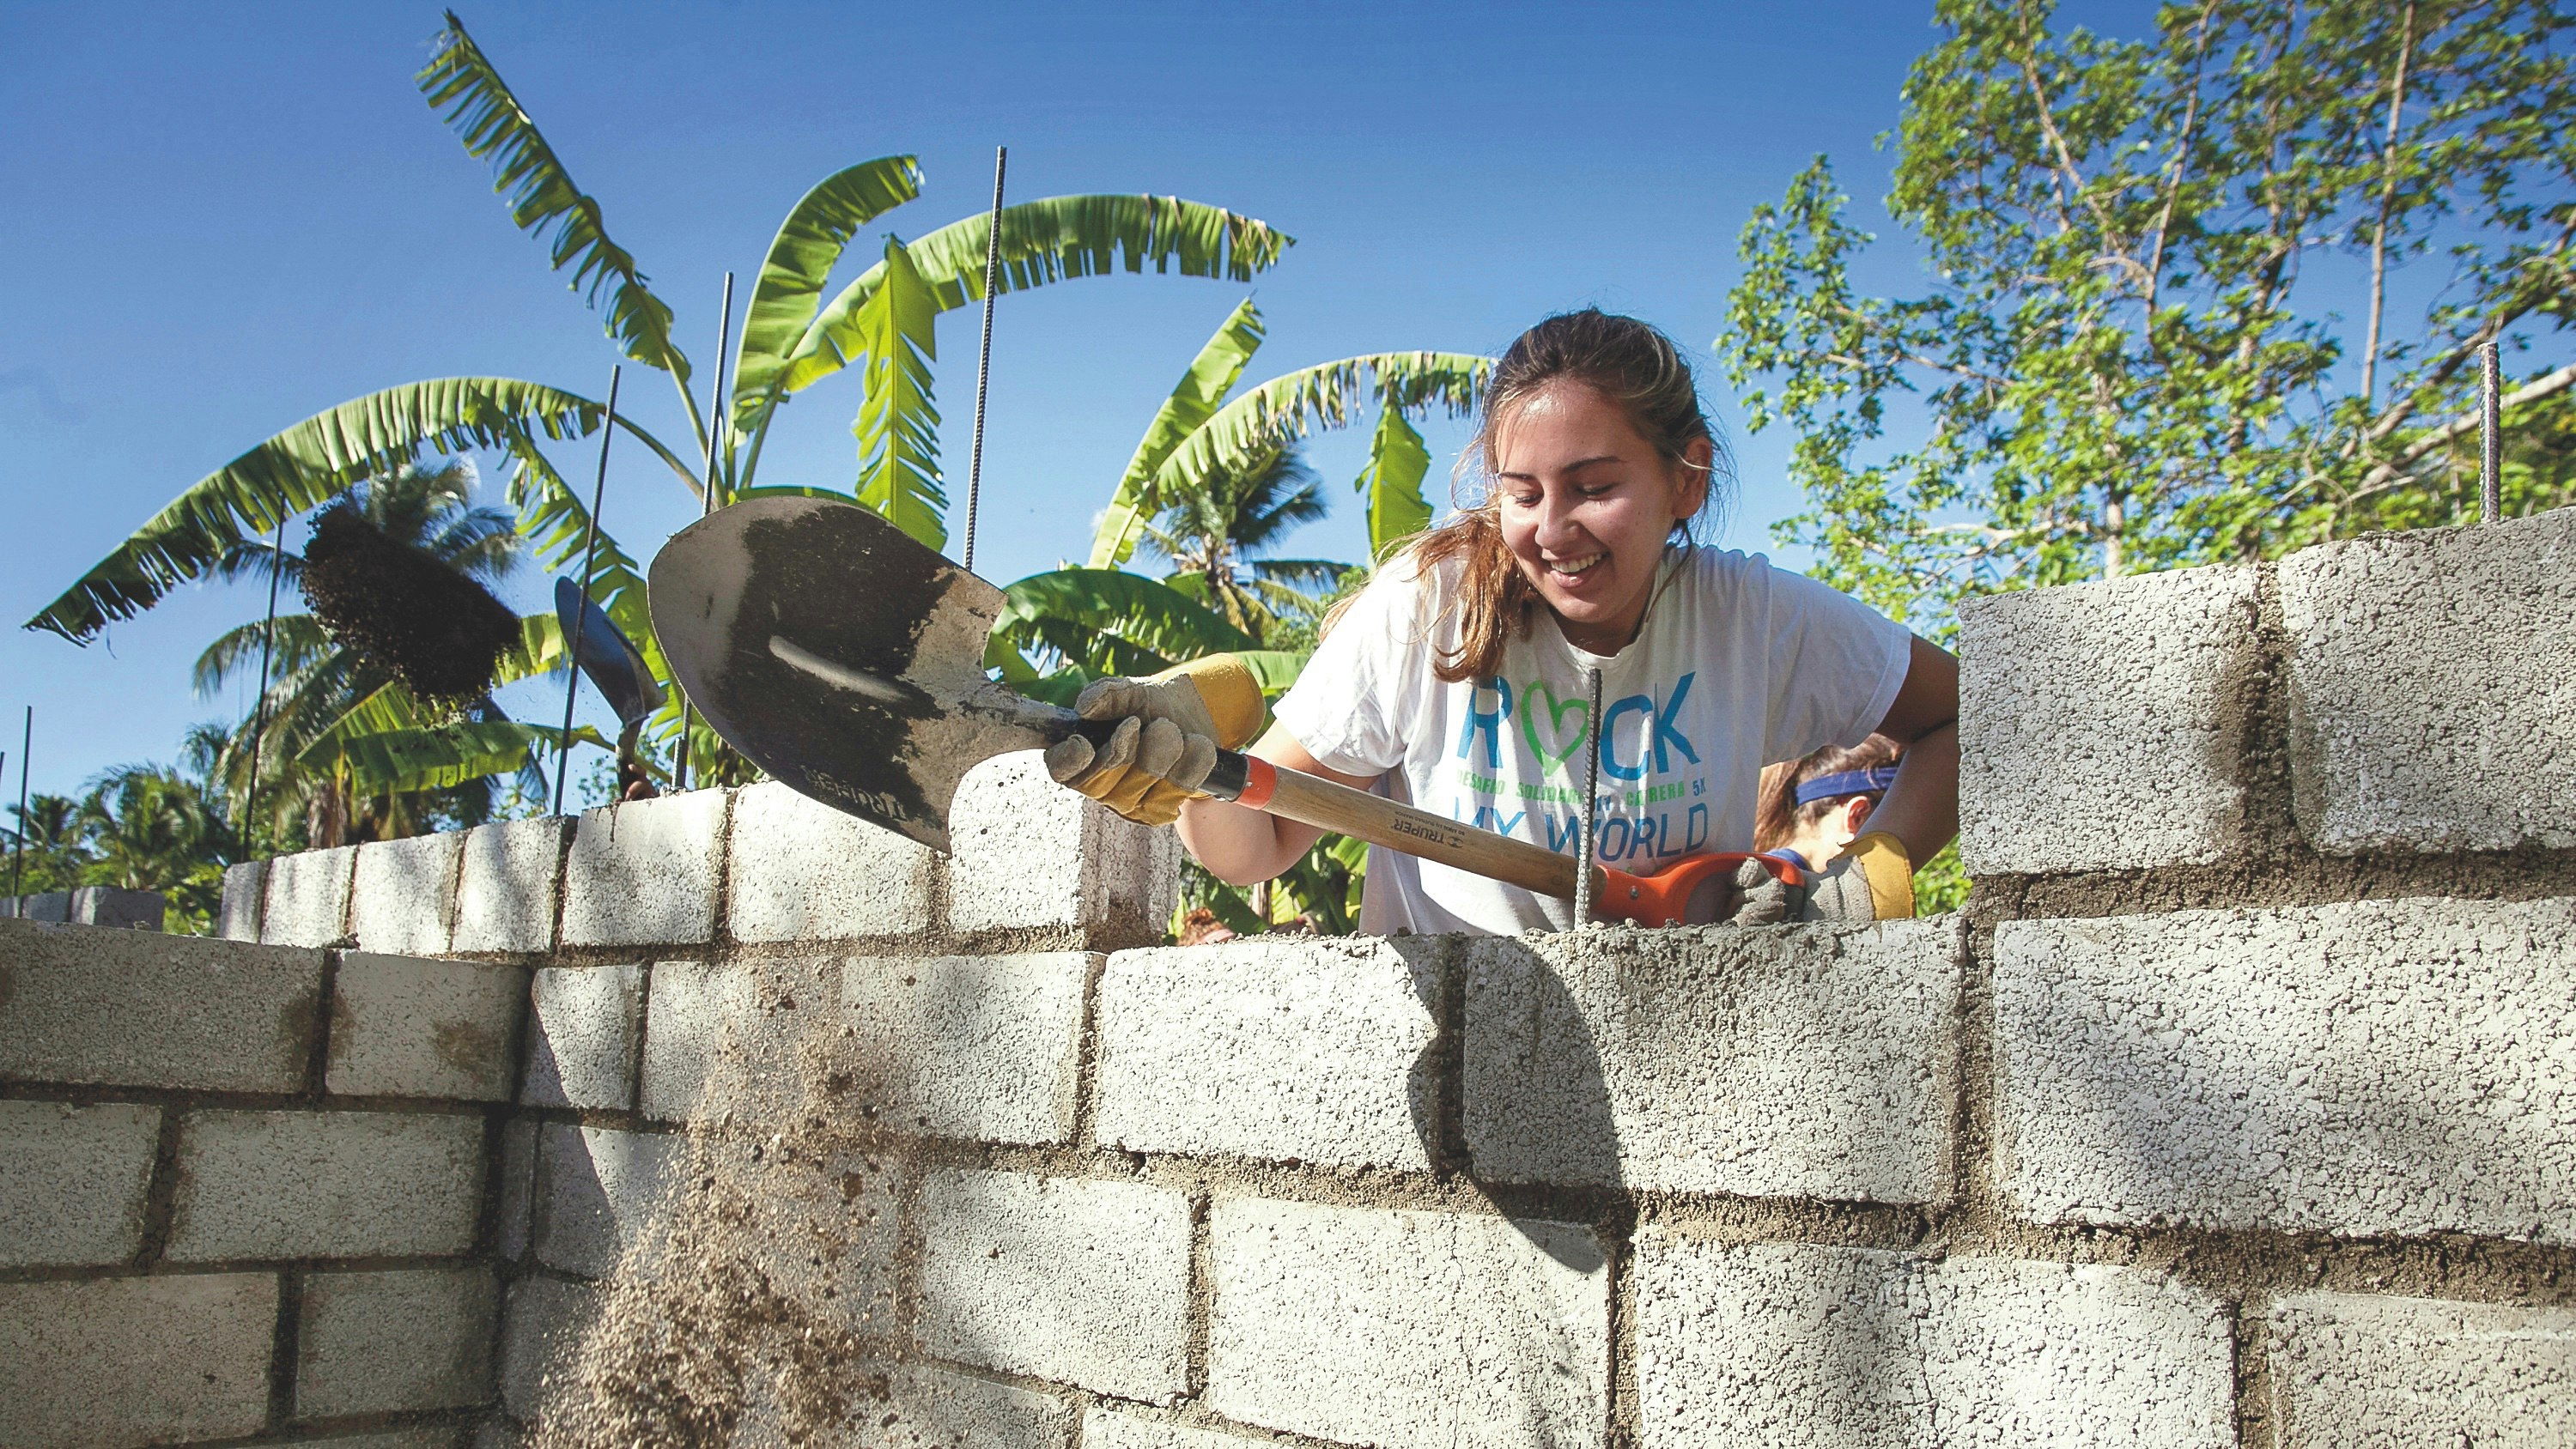 The Rustic Pathways Foundation Paves Way for Greater Impact